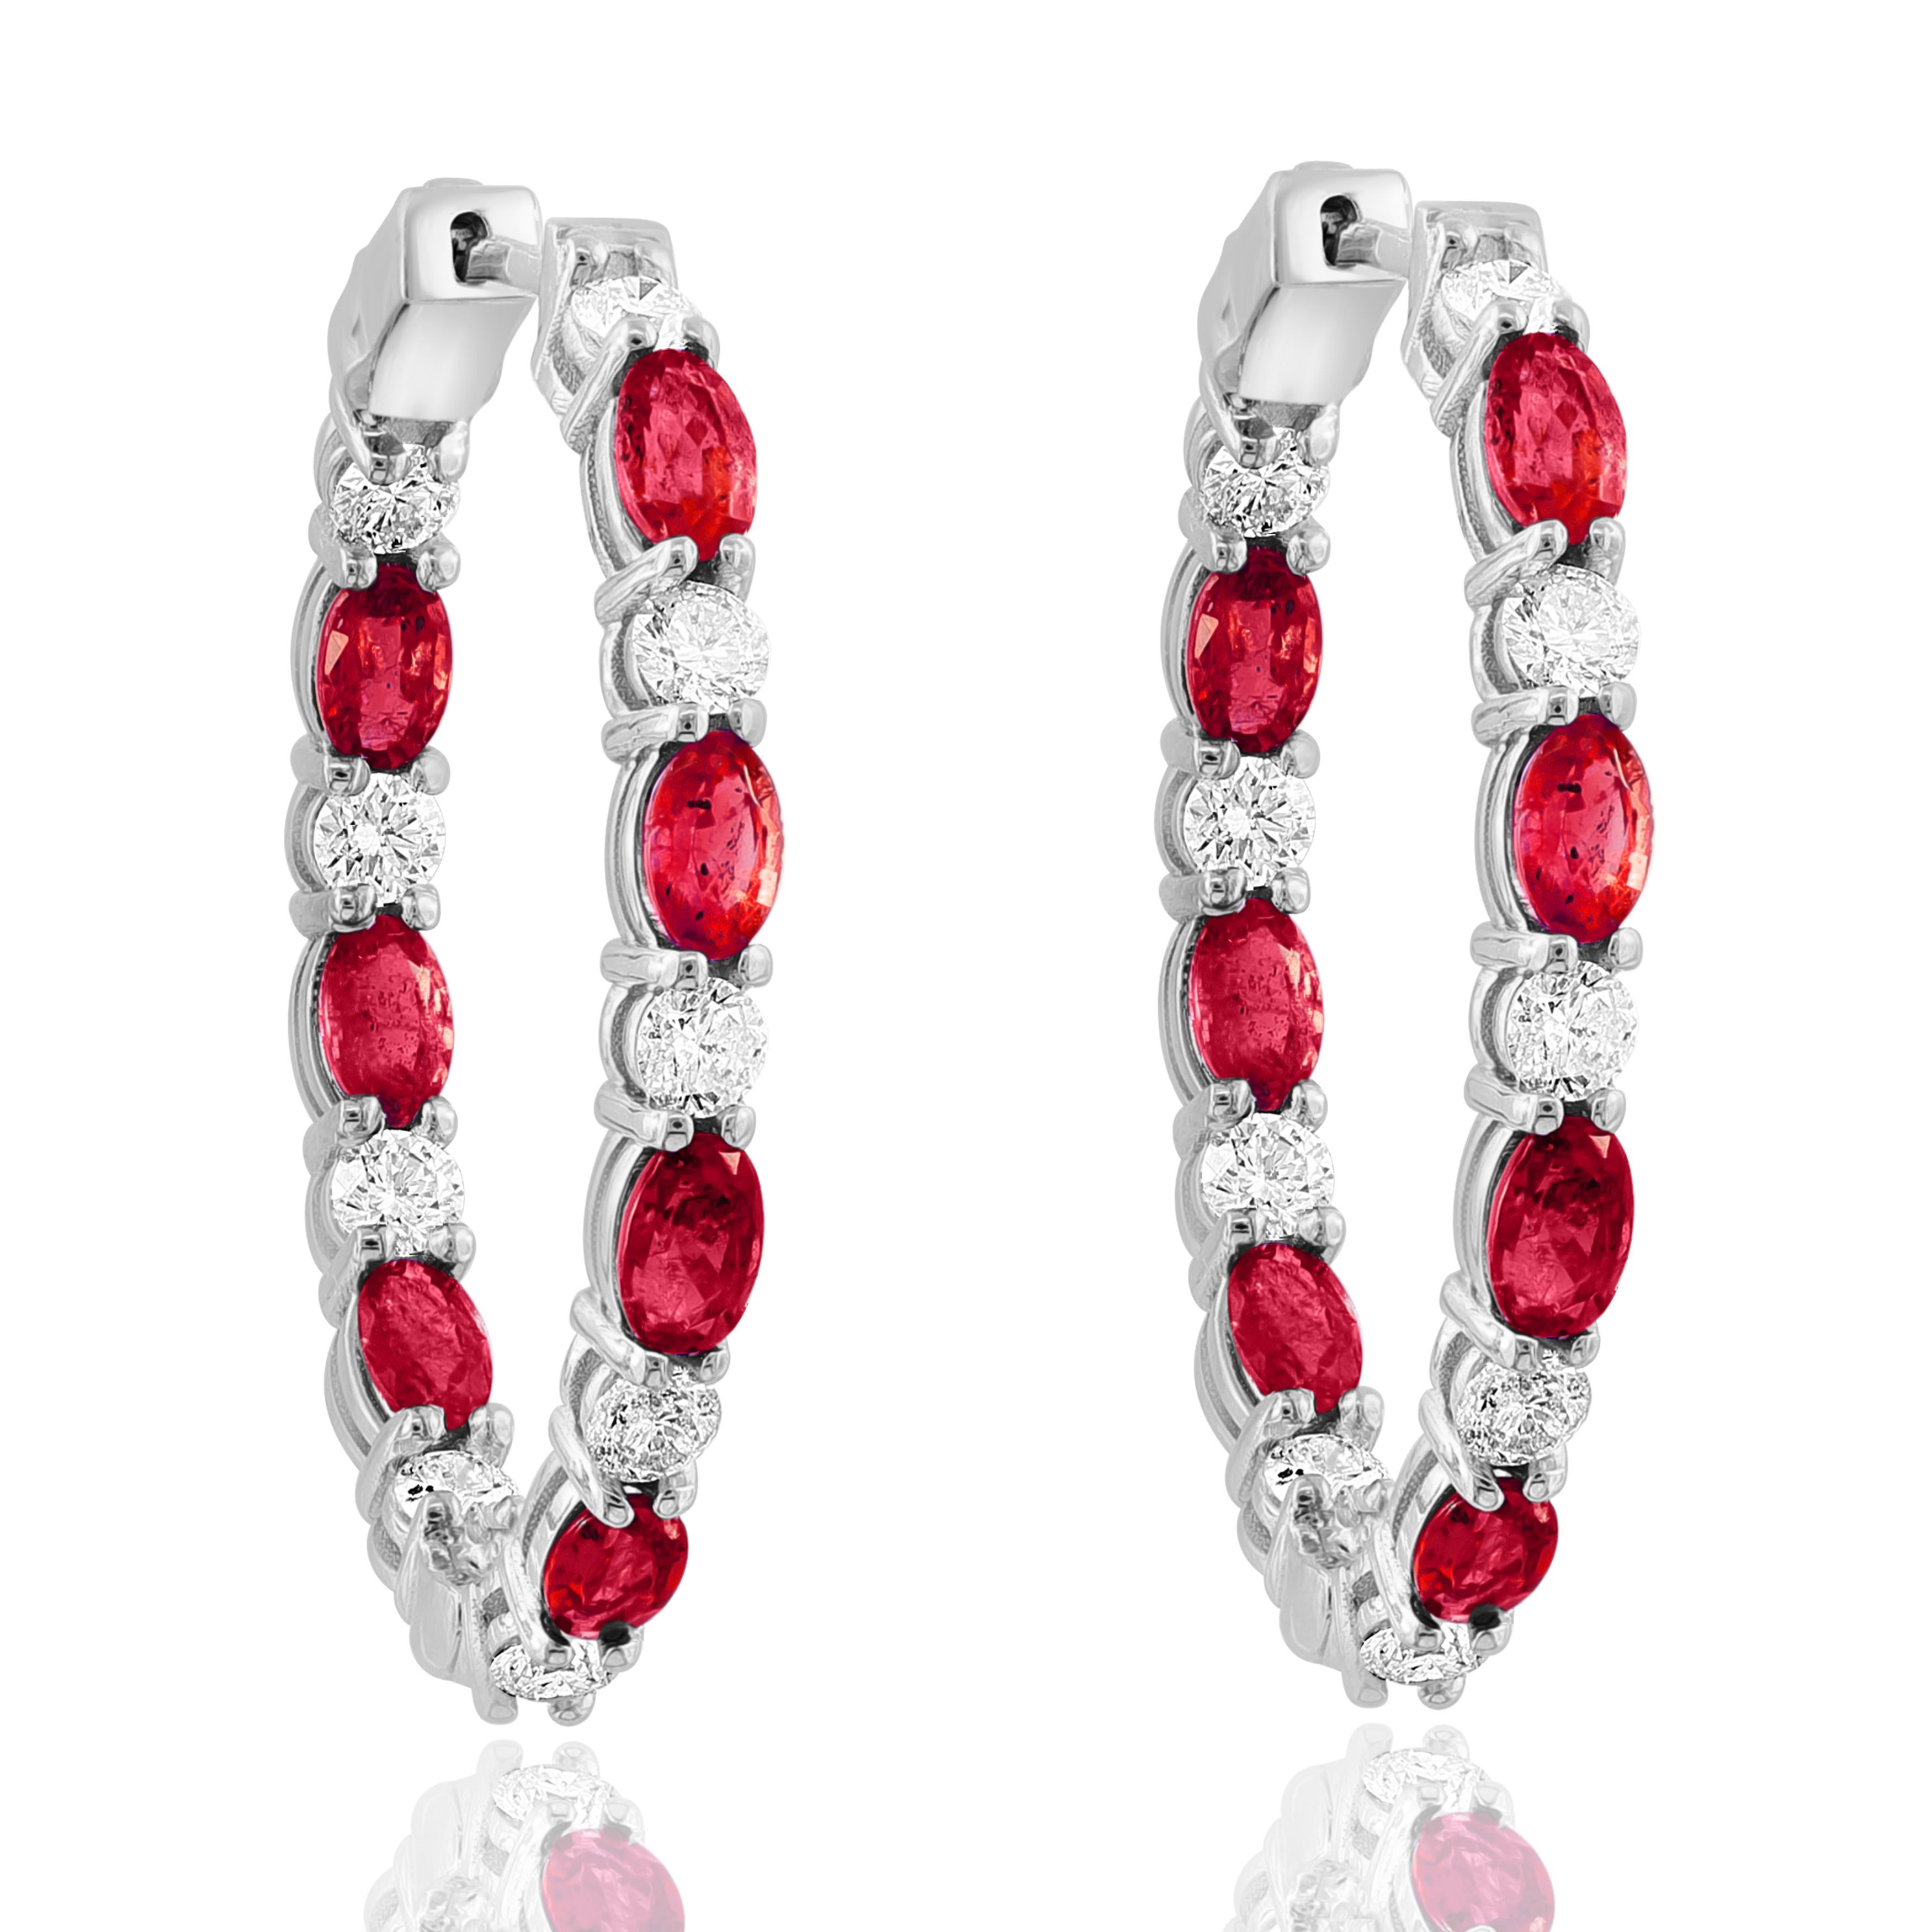 A stylish and versatile style hoop earring showcasing oval cut 14 Red Rubies weighing 4.73 carats total, channel set in a diamond-encrusted 14-karat White gold mounting. 18 Diamonds weigh 1.79 carats in total.

All diamonds are GH color SI1